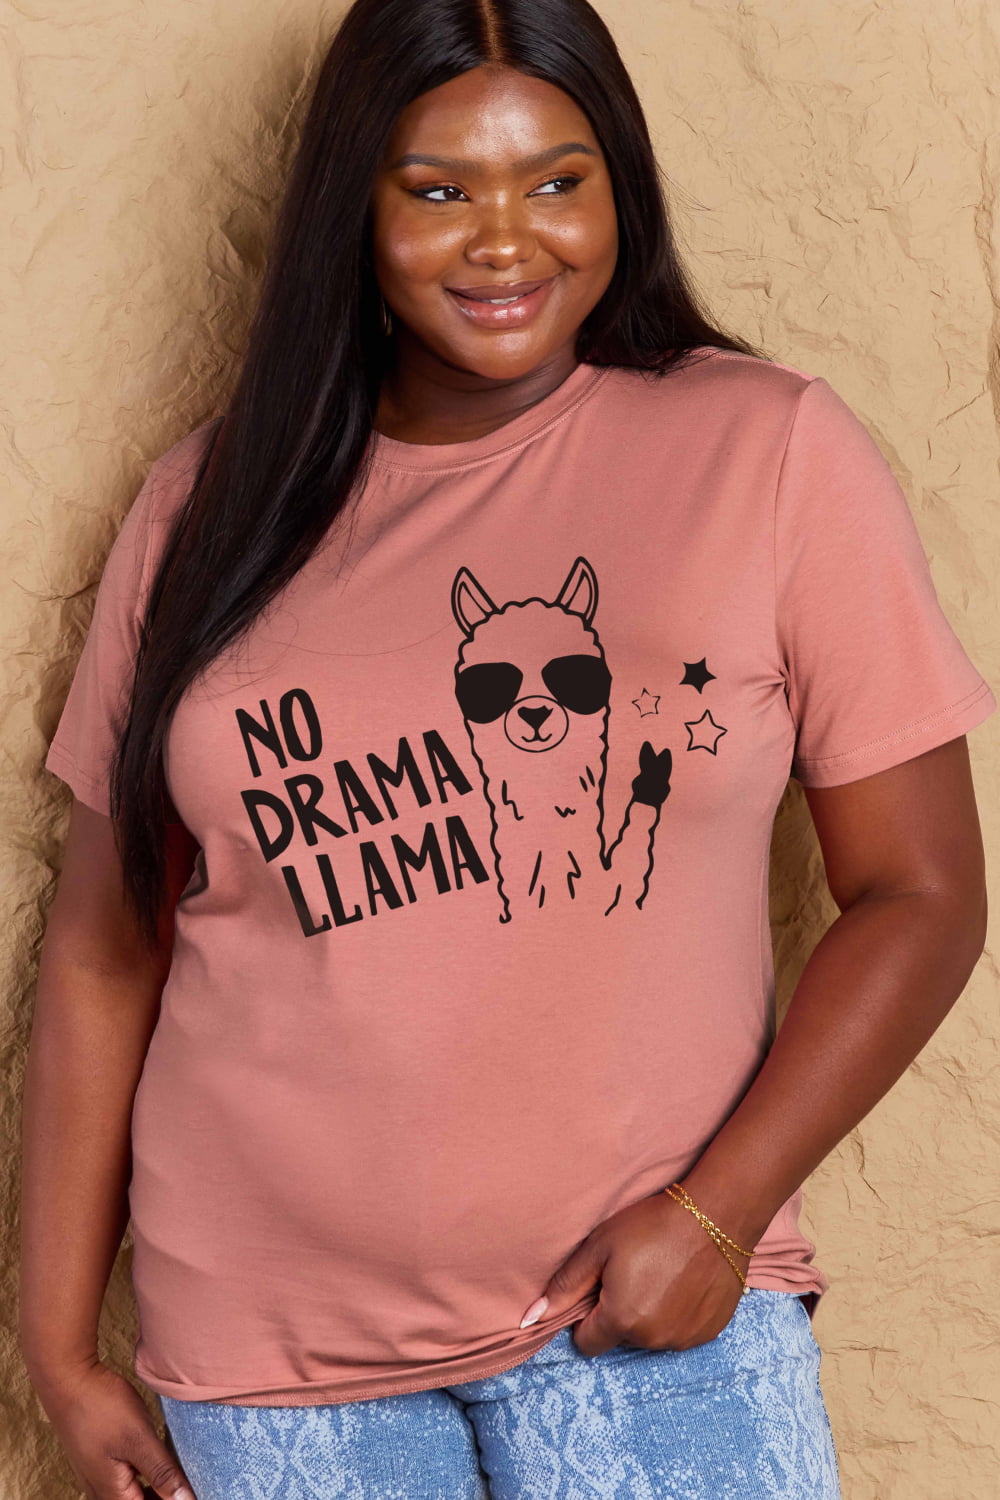 Simply Love Full Size NO DRAMA LLAMA Graphic Cotton Tee free shipping -Oh Em Gee Boutique